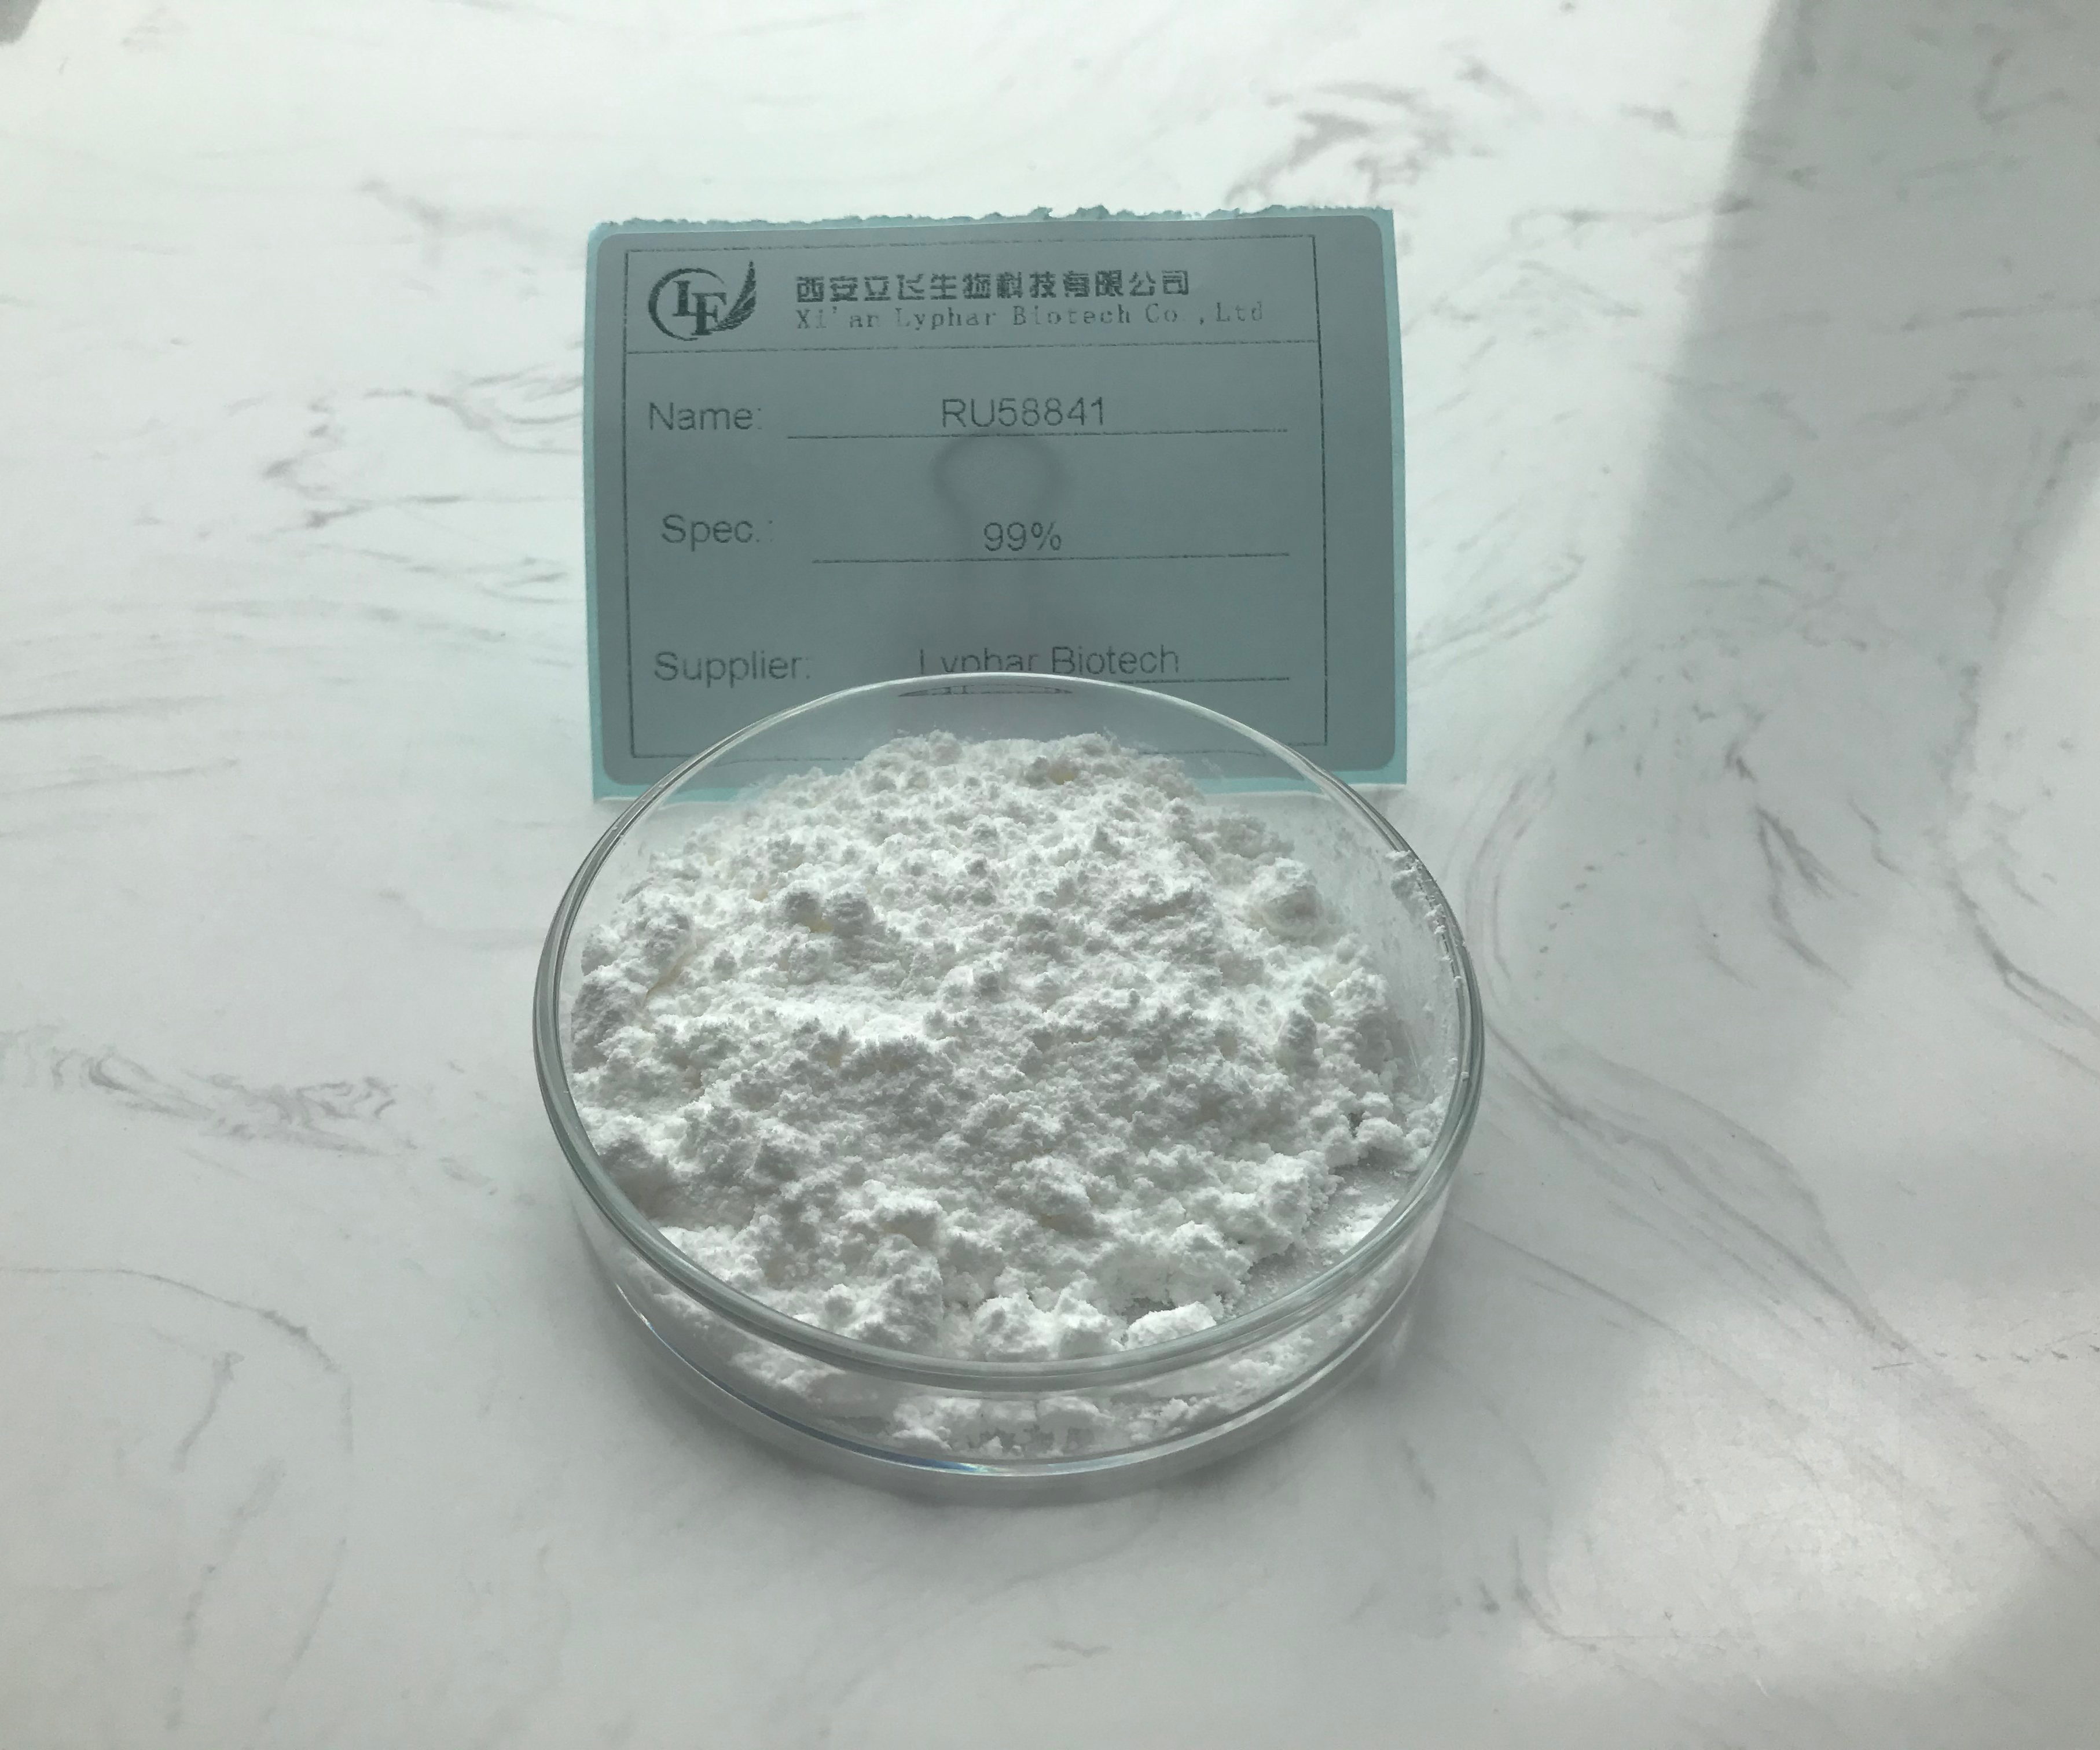 Introduction to the functions and characteristics of ru58841 powder